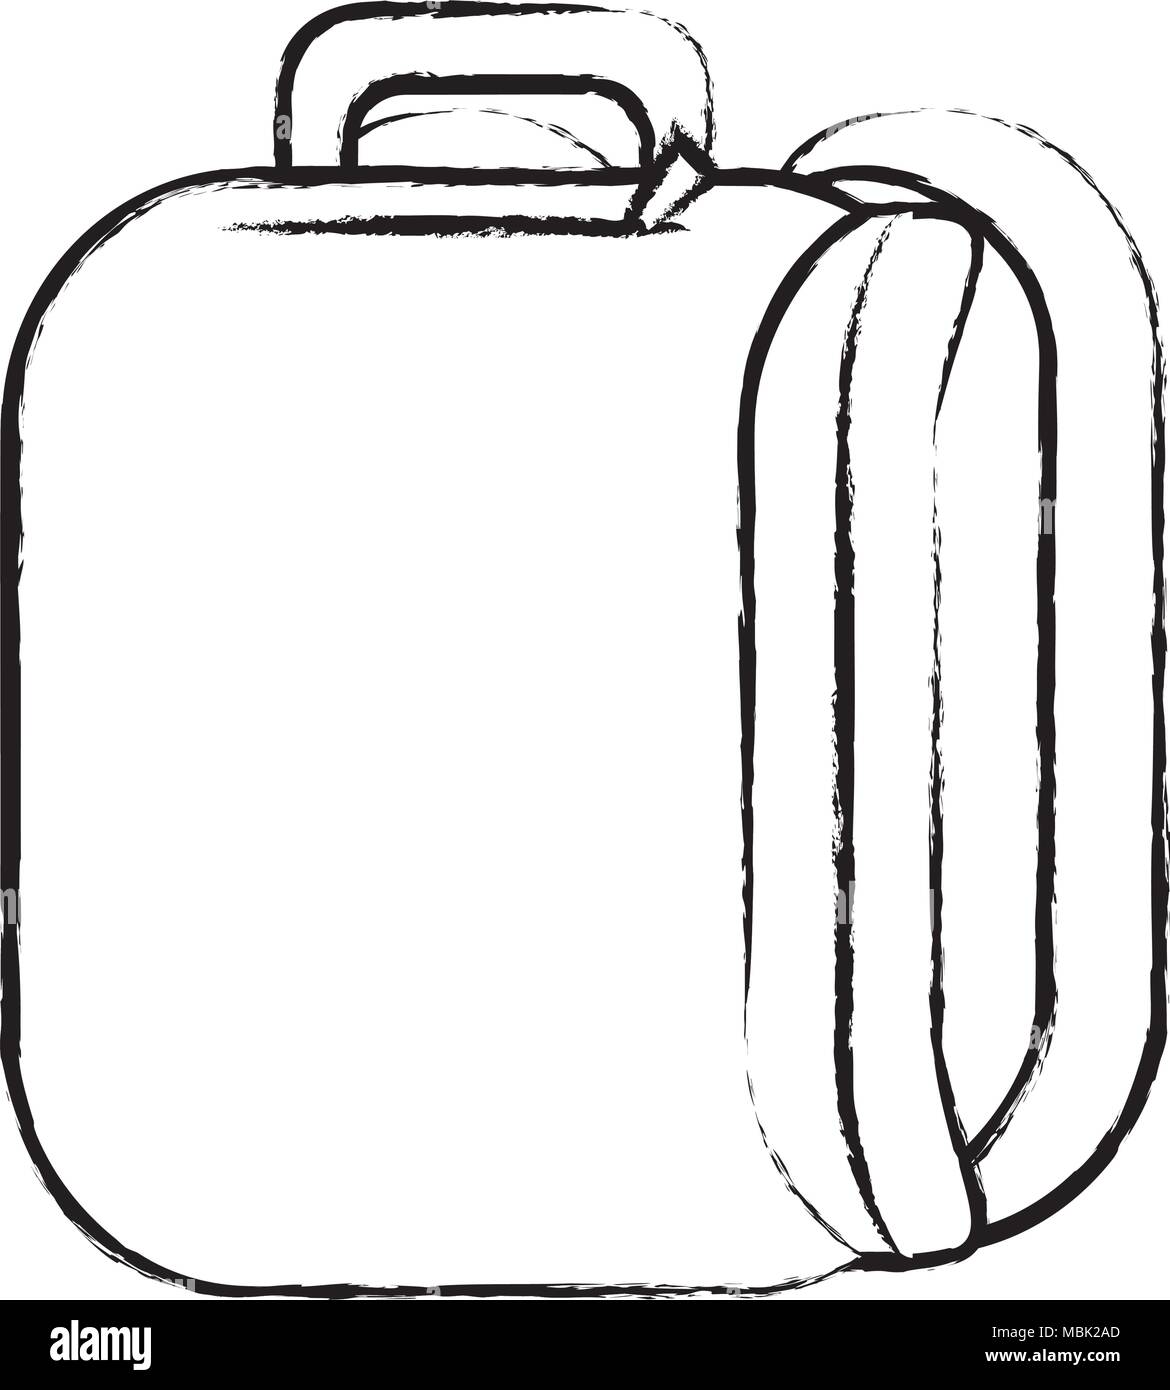 Sketch Of School Backpack Icon Over White Background Vector